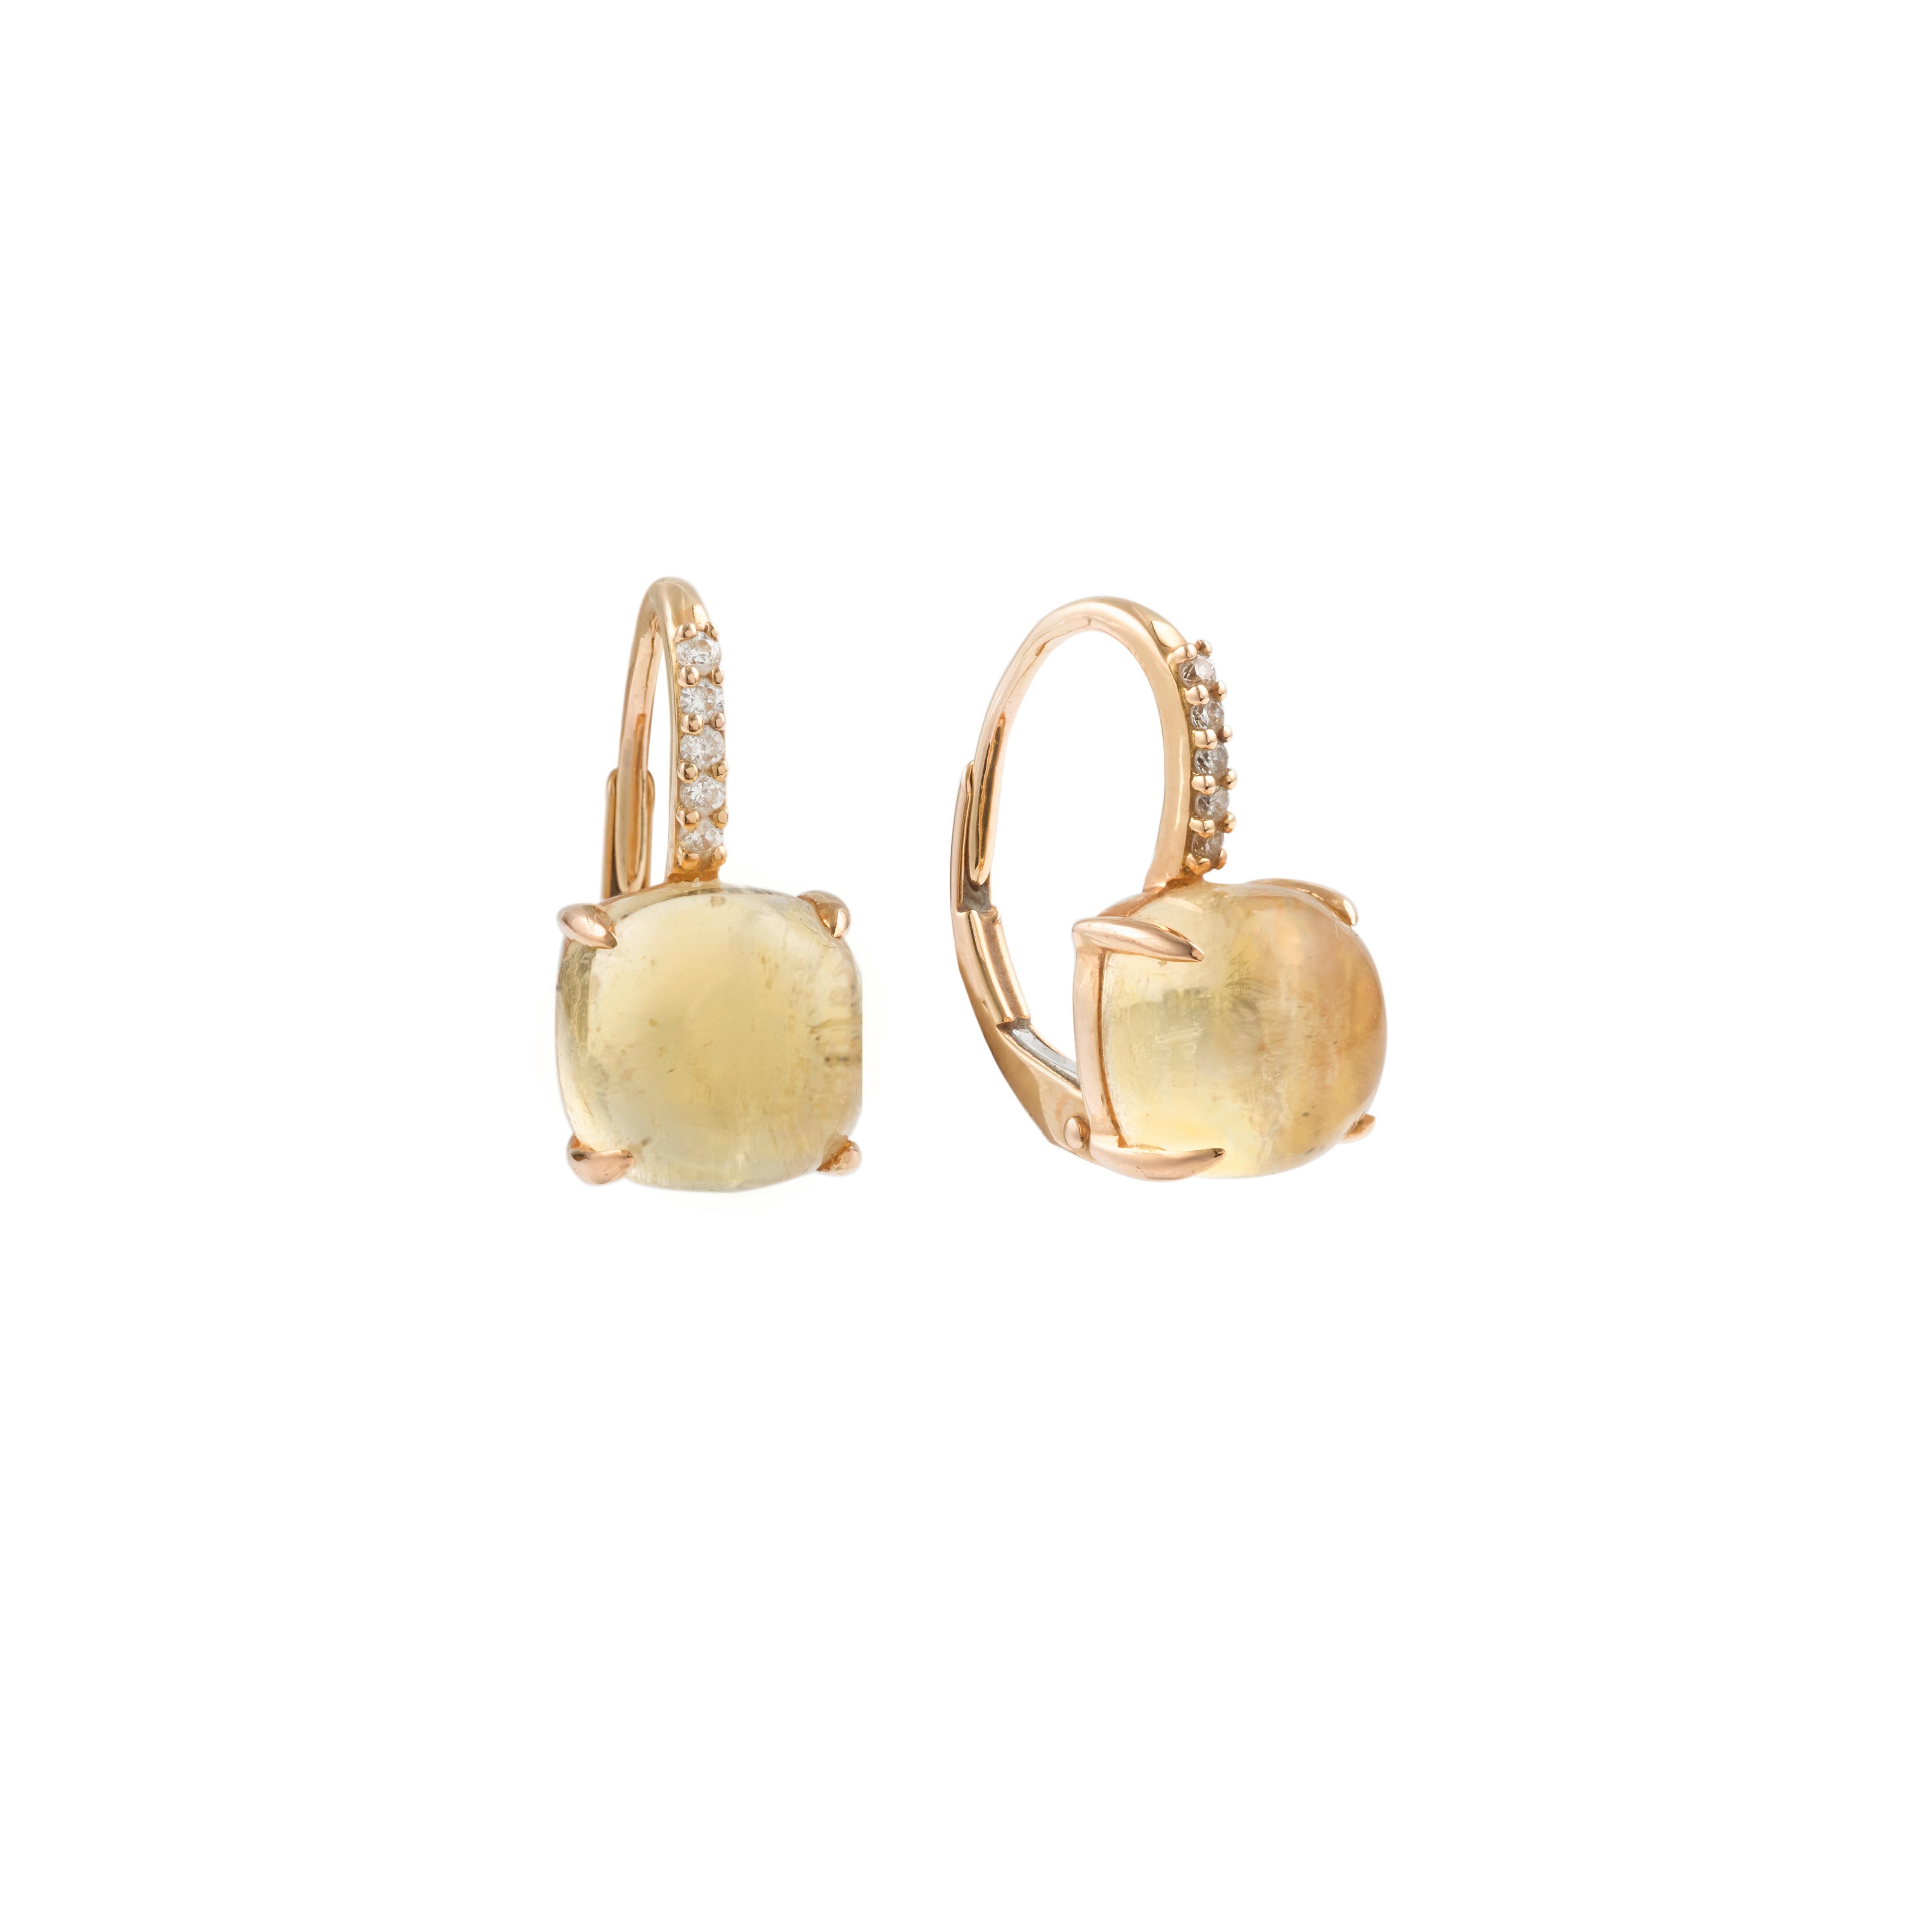 Very elegant and charming cushion shaped citrine and five diamonds 18K Yellow gold earrings.

18K gold 750 / 1000th

Total Height: 1.7 cm